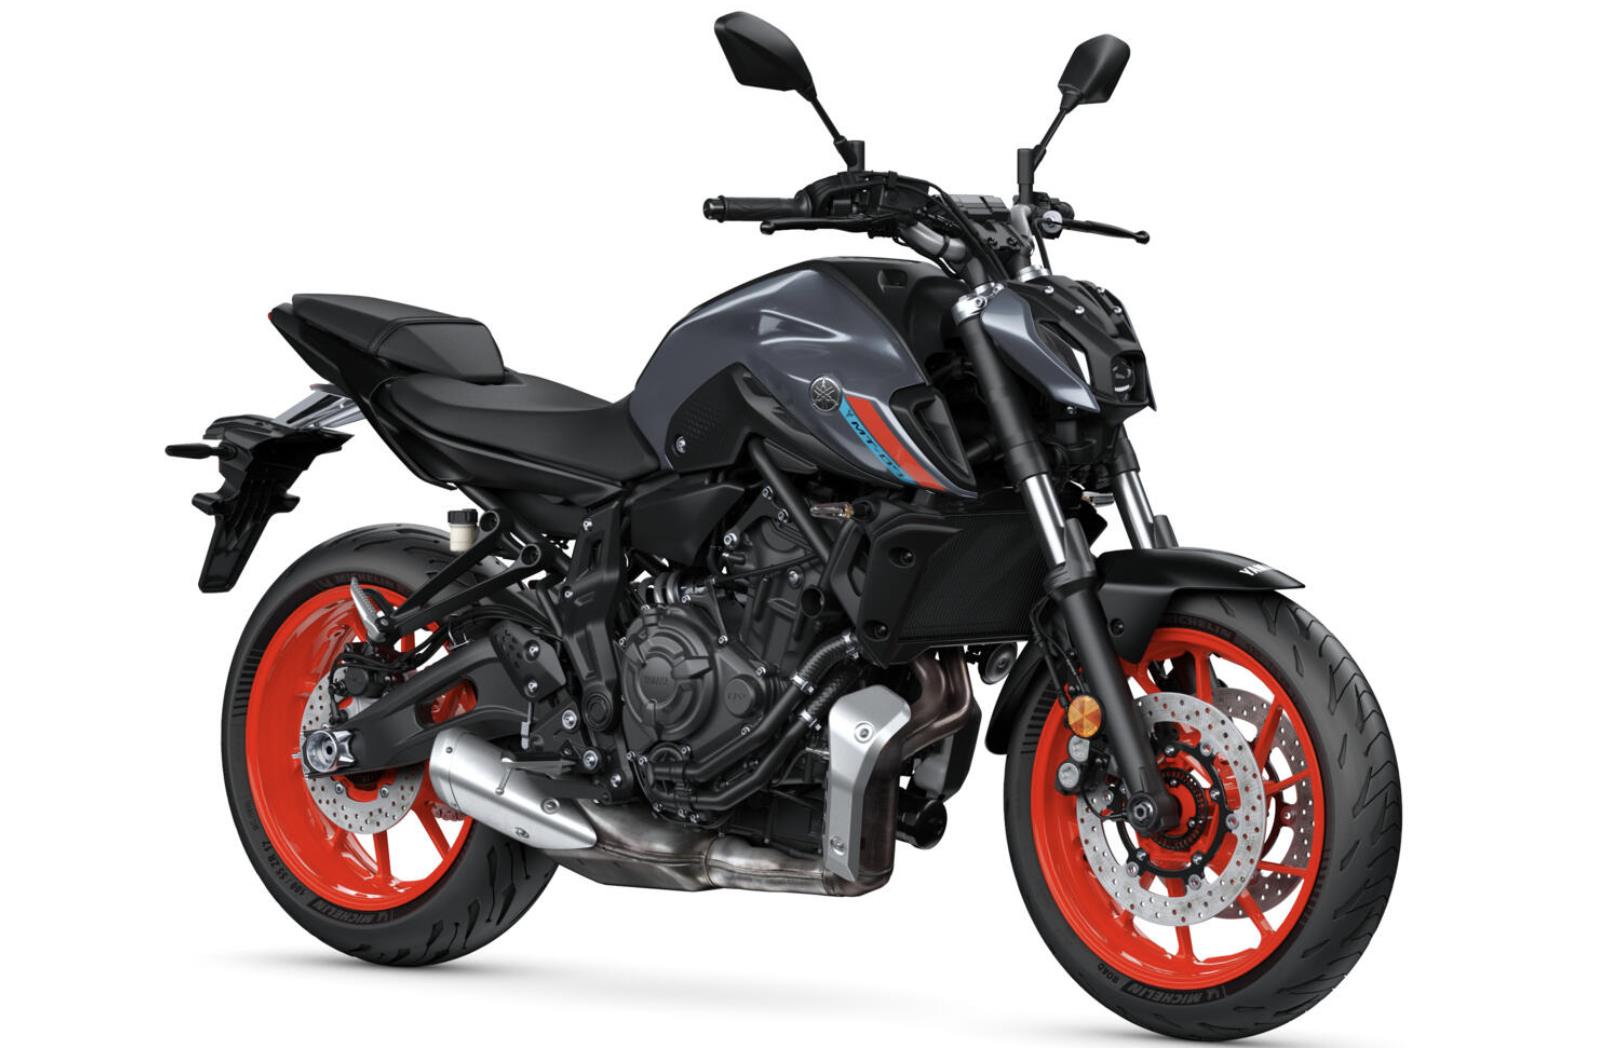 2022 Yamaha MT-07 Specifications and Expected Price in India